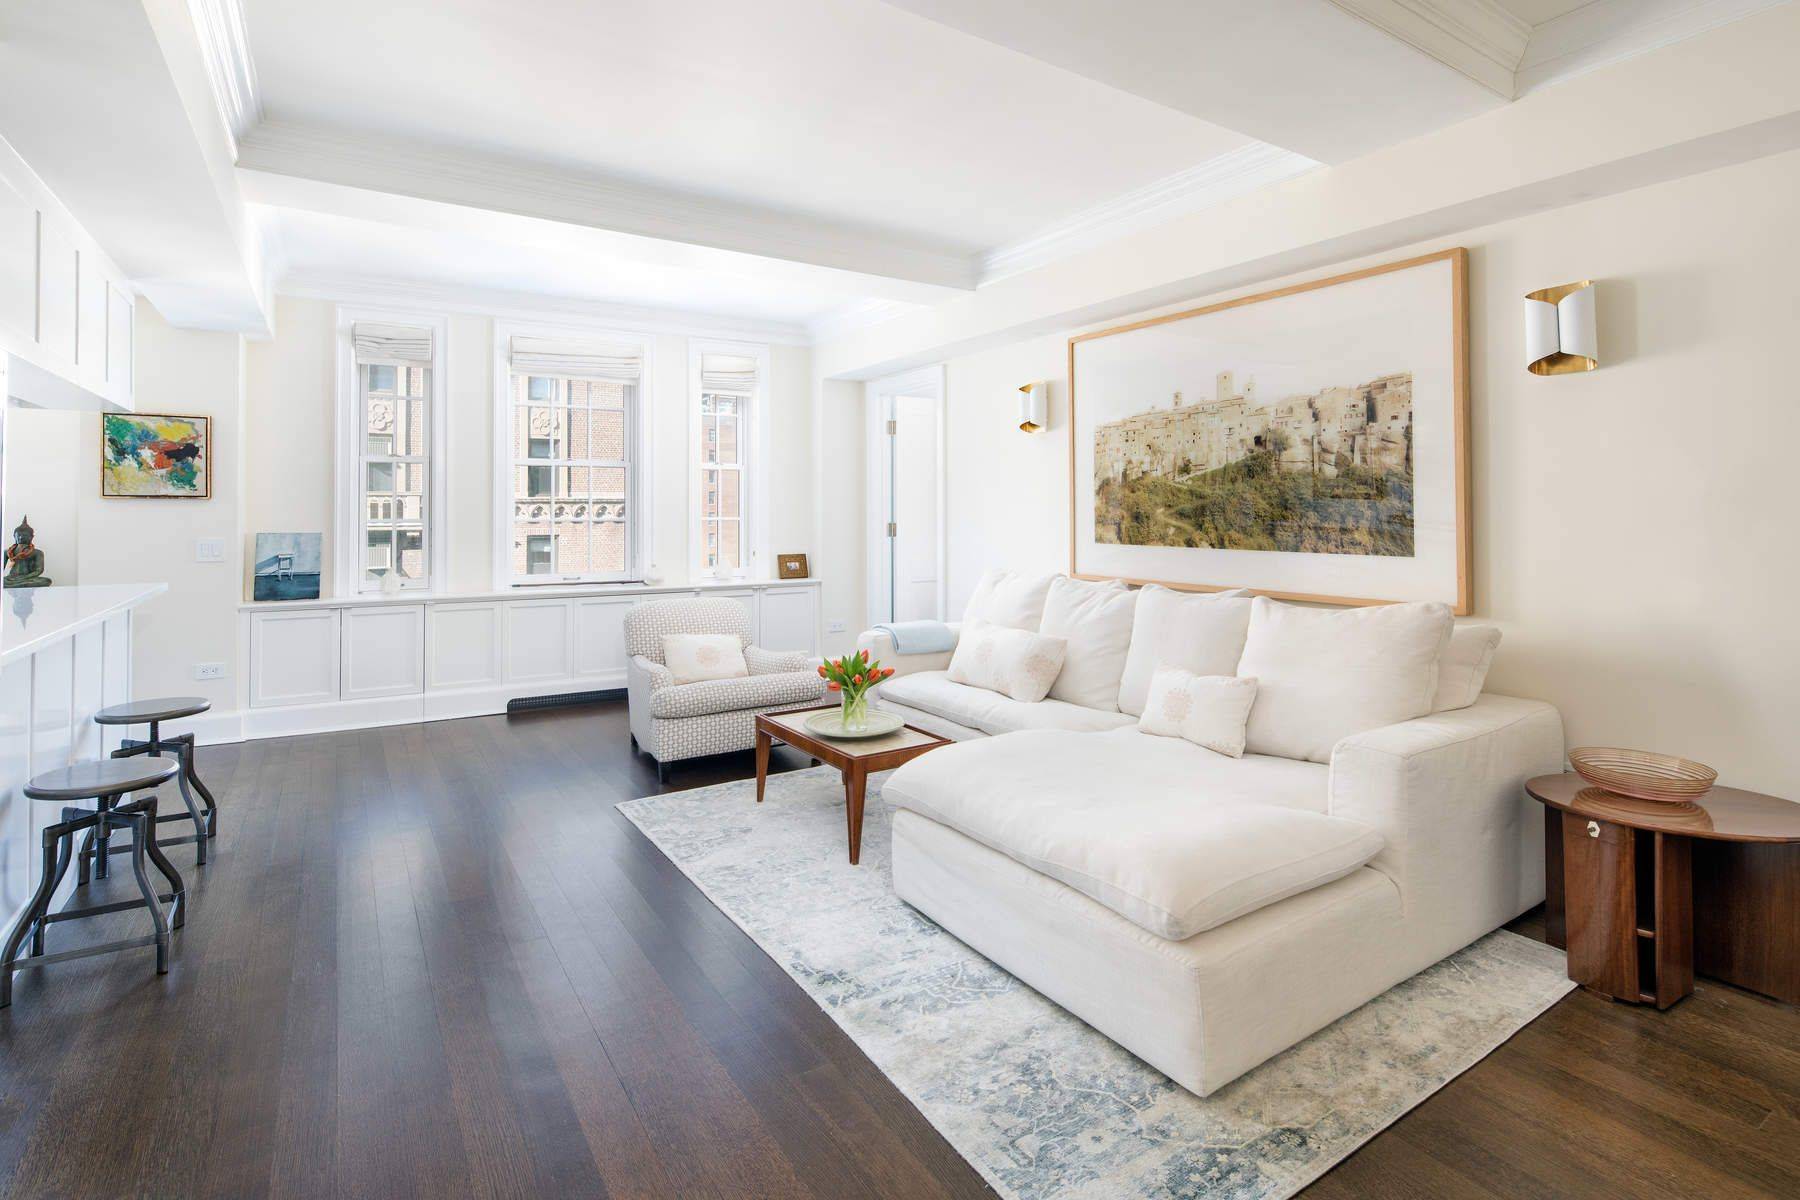 Devonshire House is a classic pre war condominium located in the heart of Greenwich Village.